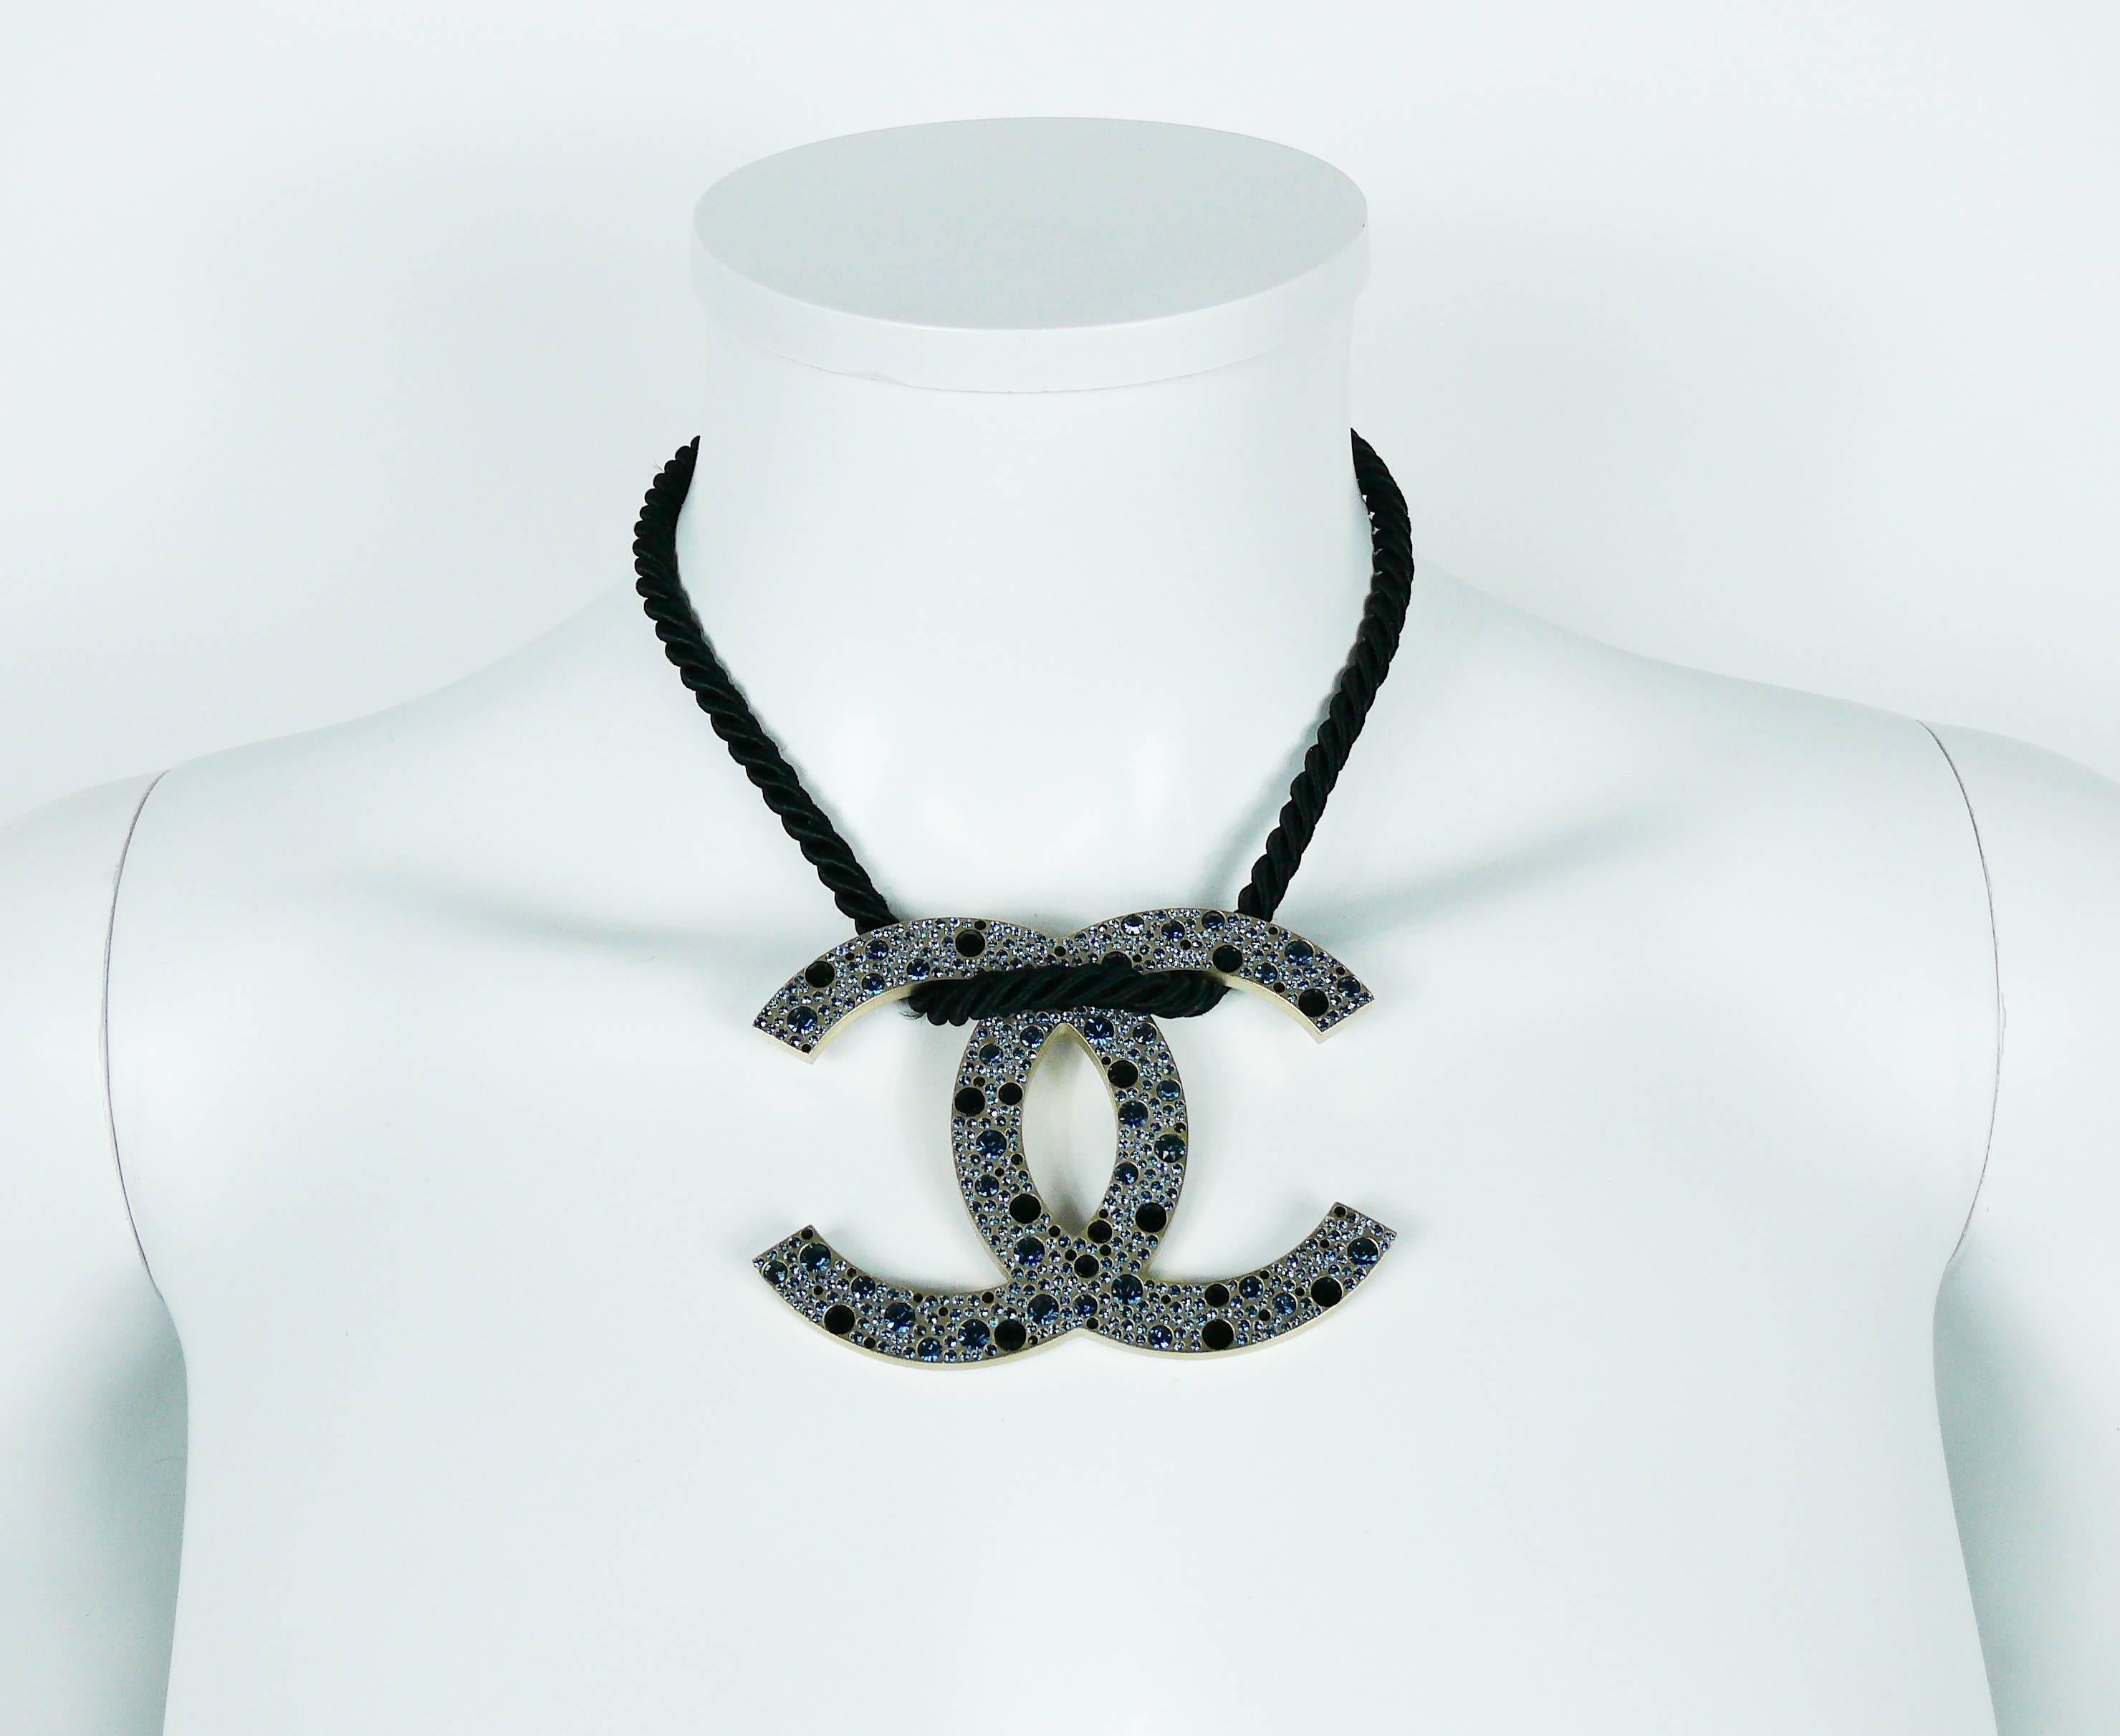 CHANEL rare jumbo CC logo pendant necklace embellished with blue shade SWAROVSKI crystals.

Spring-Summer 2008 Collection.

This necklace features :
- Brushed metal with pale gilt.
- SWAROVSKI crystals in blue shade.
- Black braided rope.
- Hook